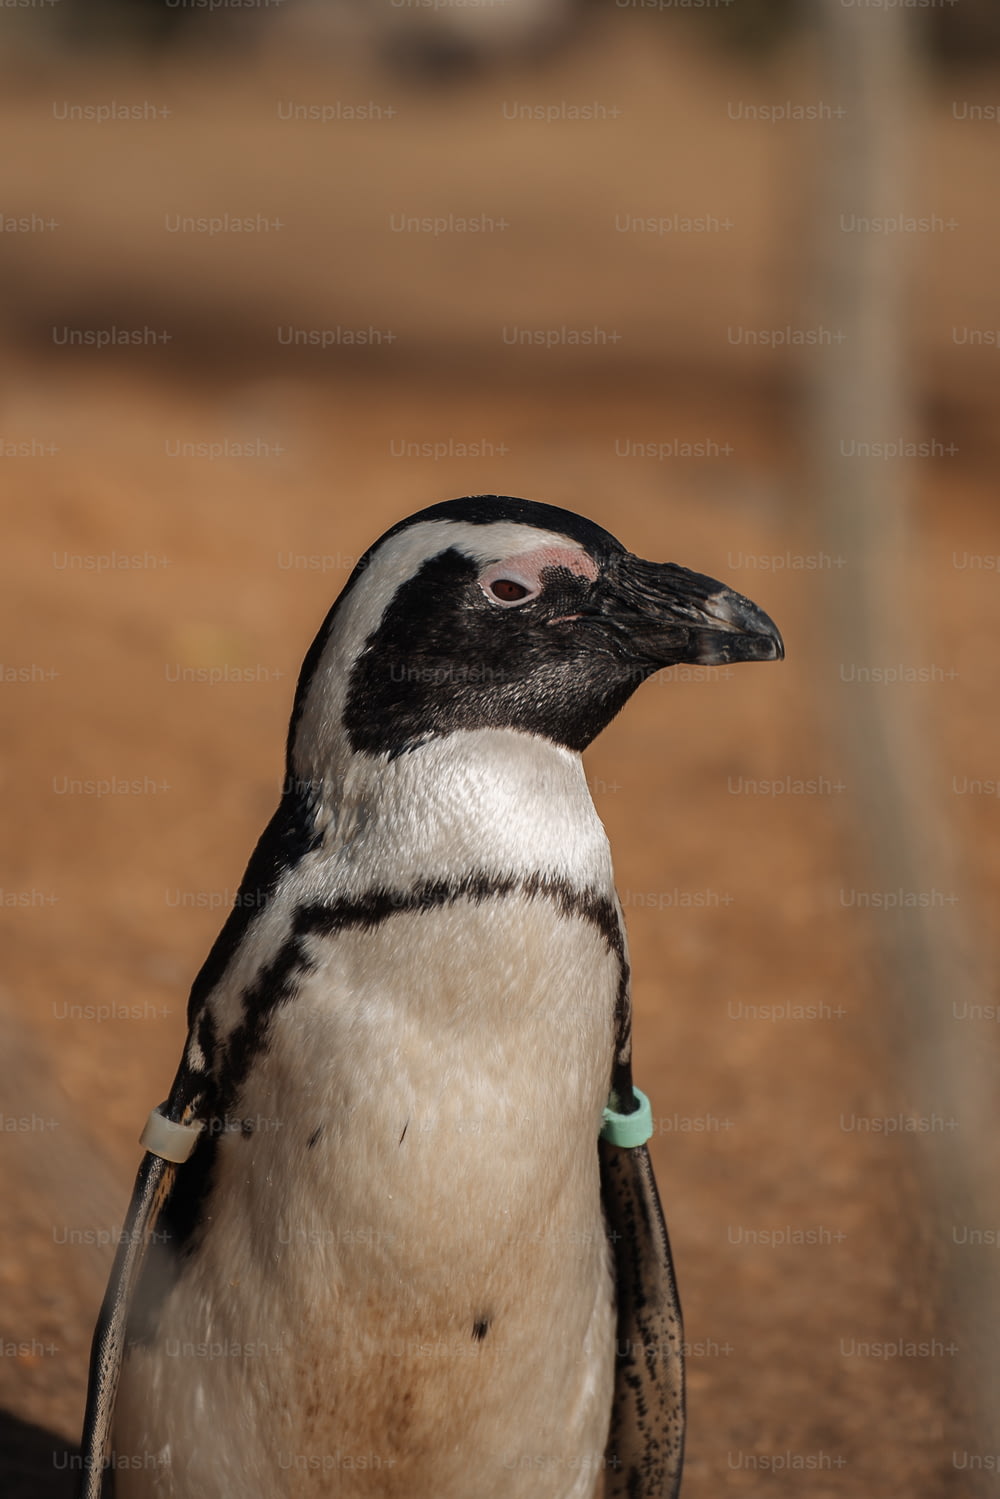 a close up of a penguin on a dirt ground